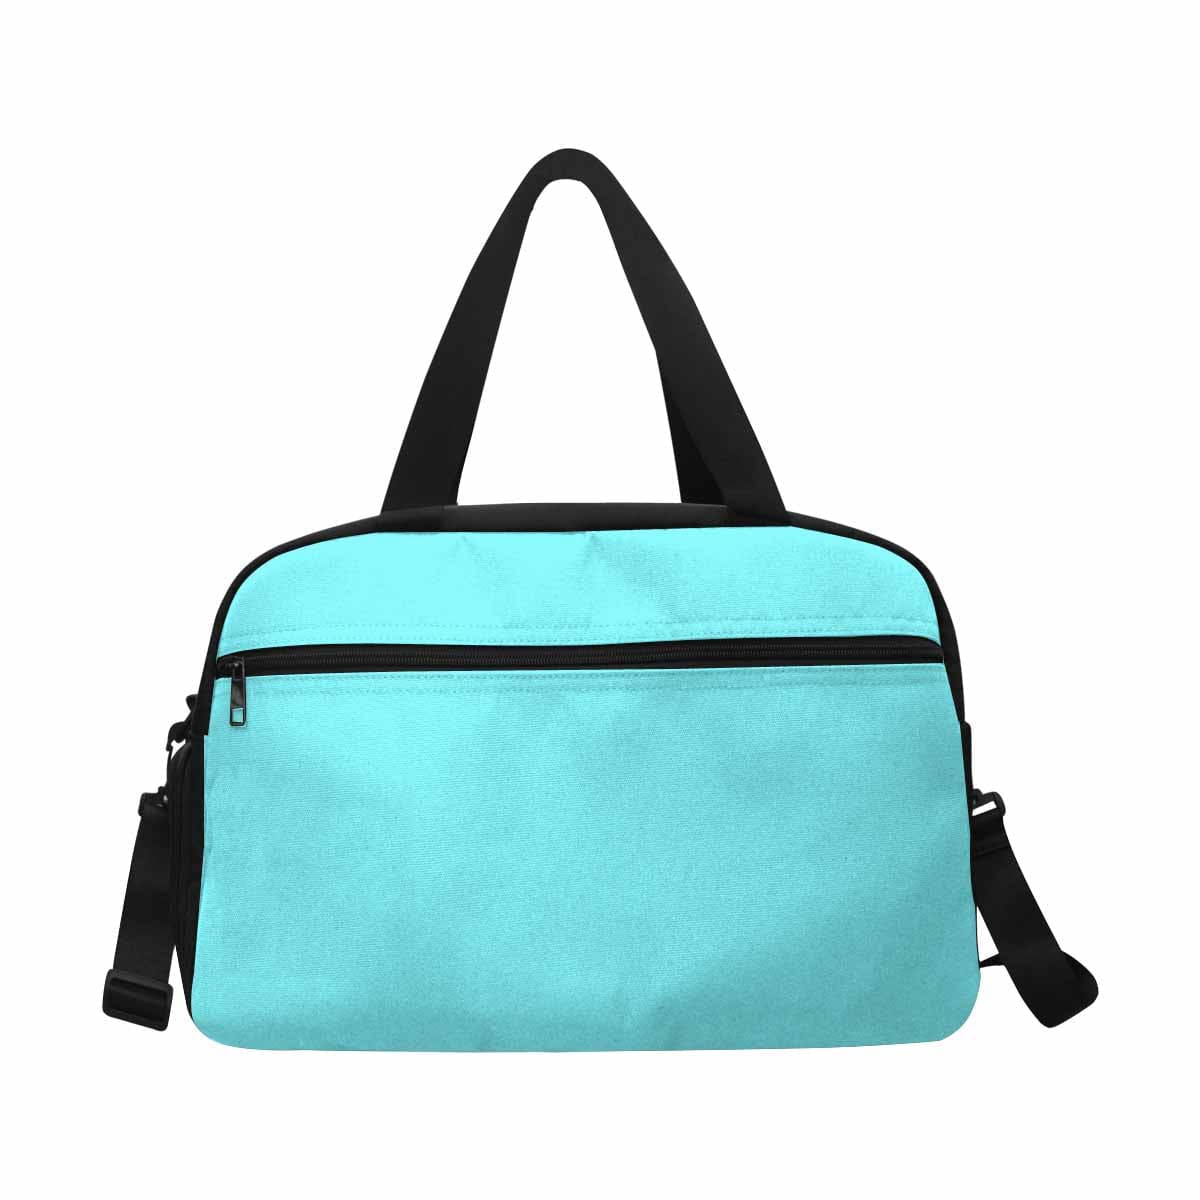 Electric Blue Tote And Crossbody Travel Bag - Bags | Travel Bags | Crossbody